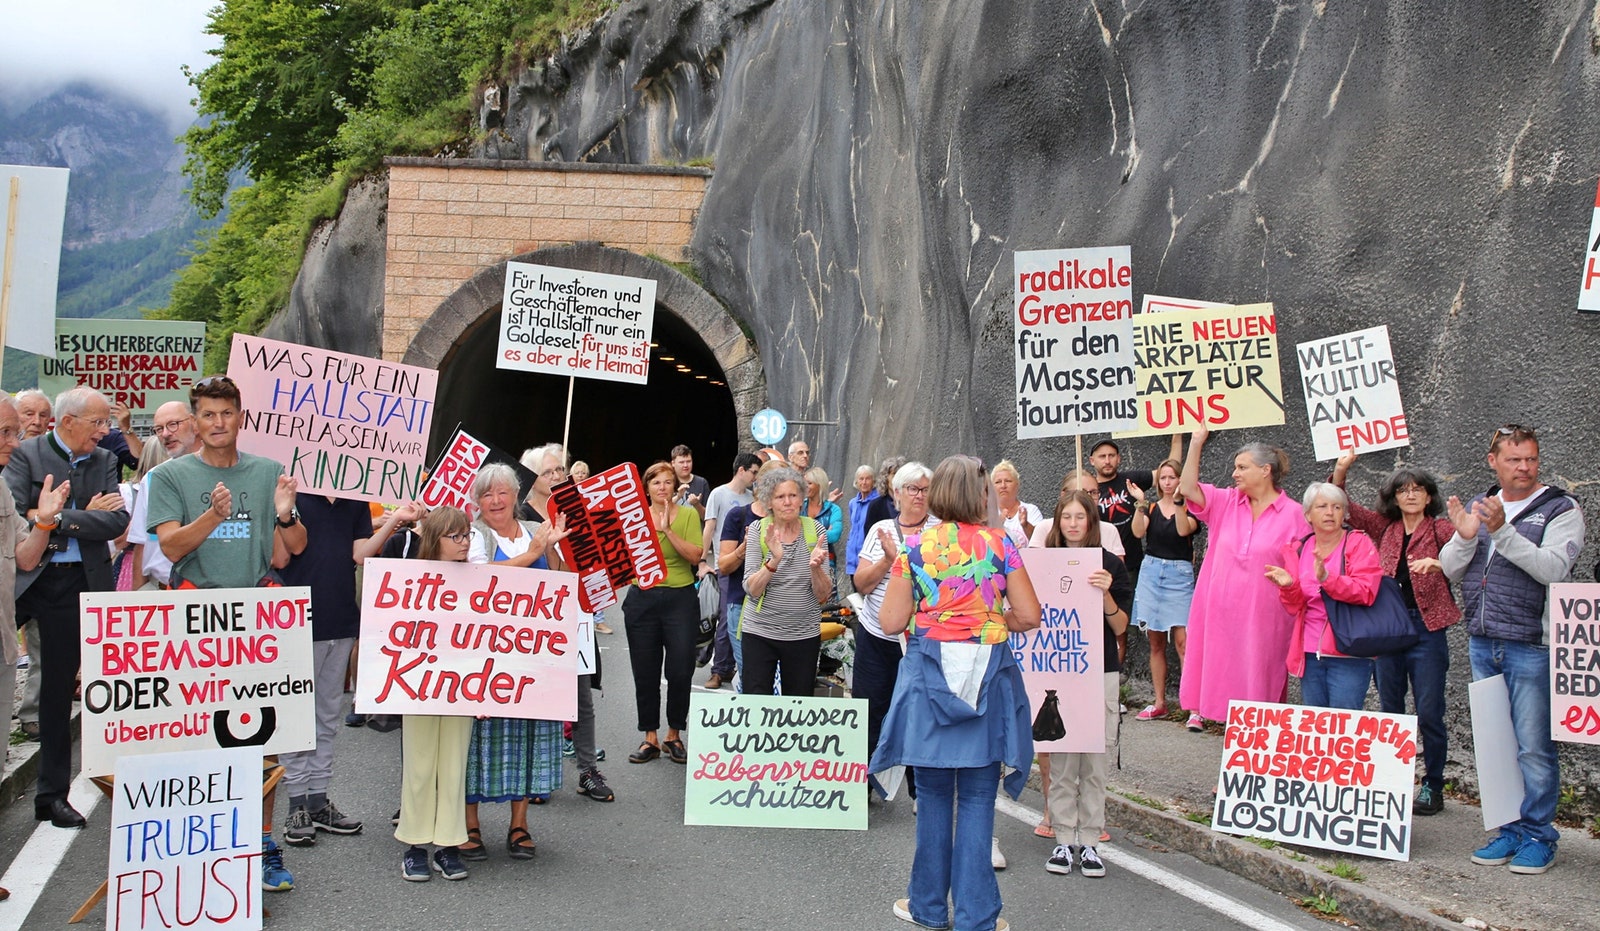 Protesters outside a tunnel on road with signs